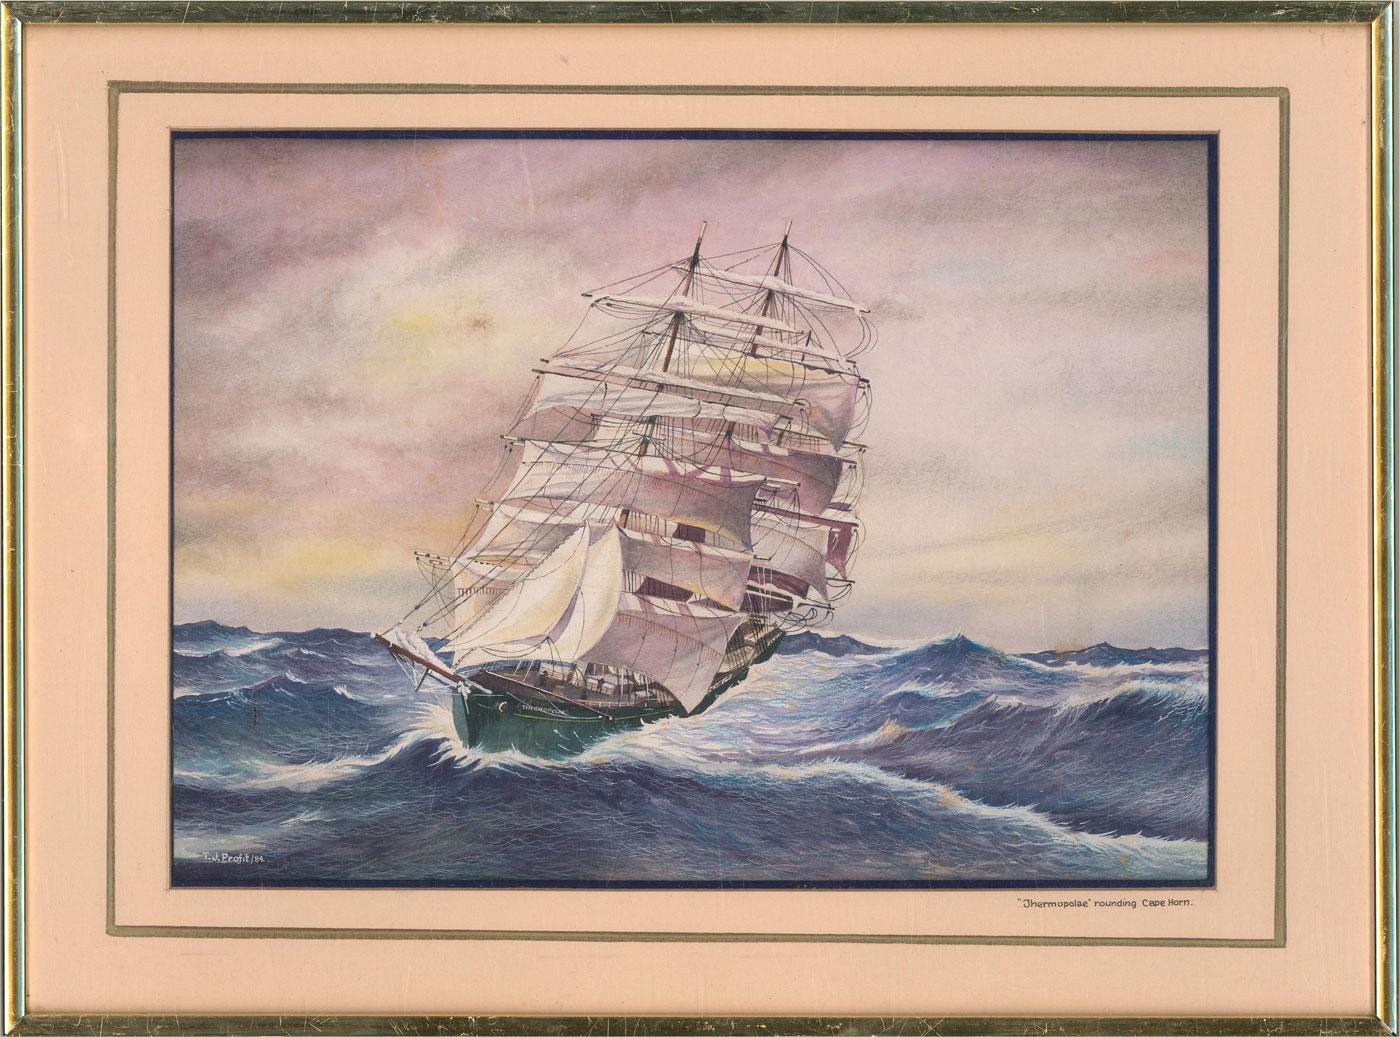 Unknown Figurative Art - T. J. Profit - Signed & Framed 1984 Watercolour, Thermopylae Rounding Cape Horn